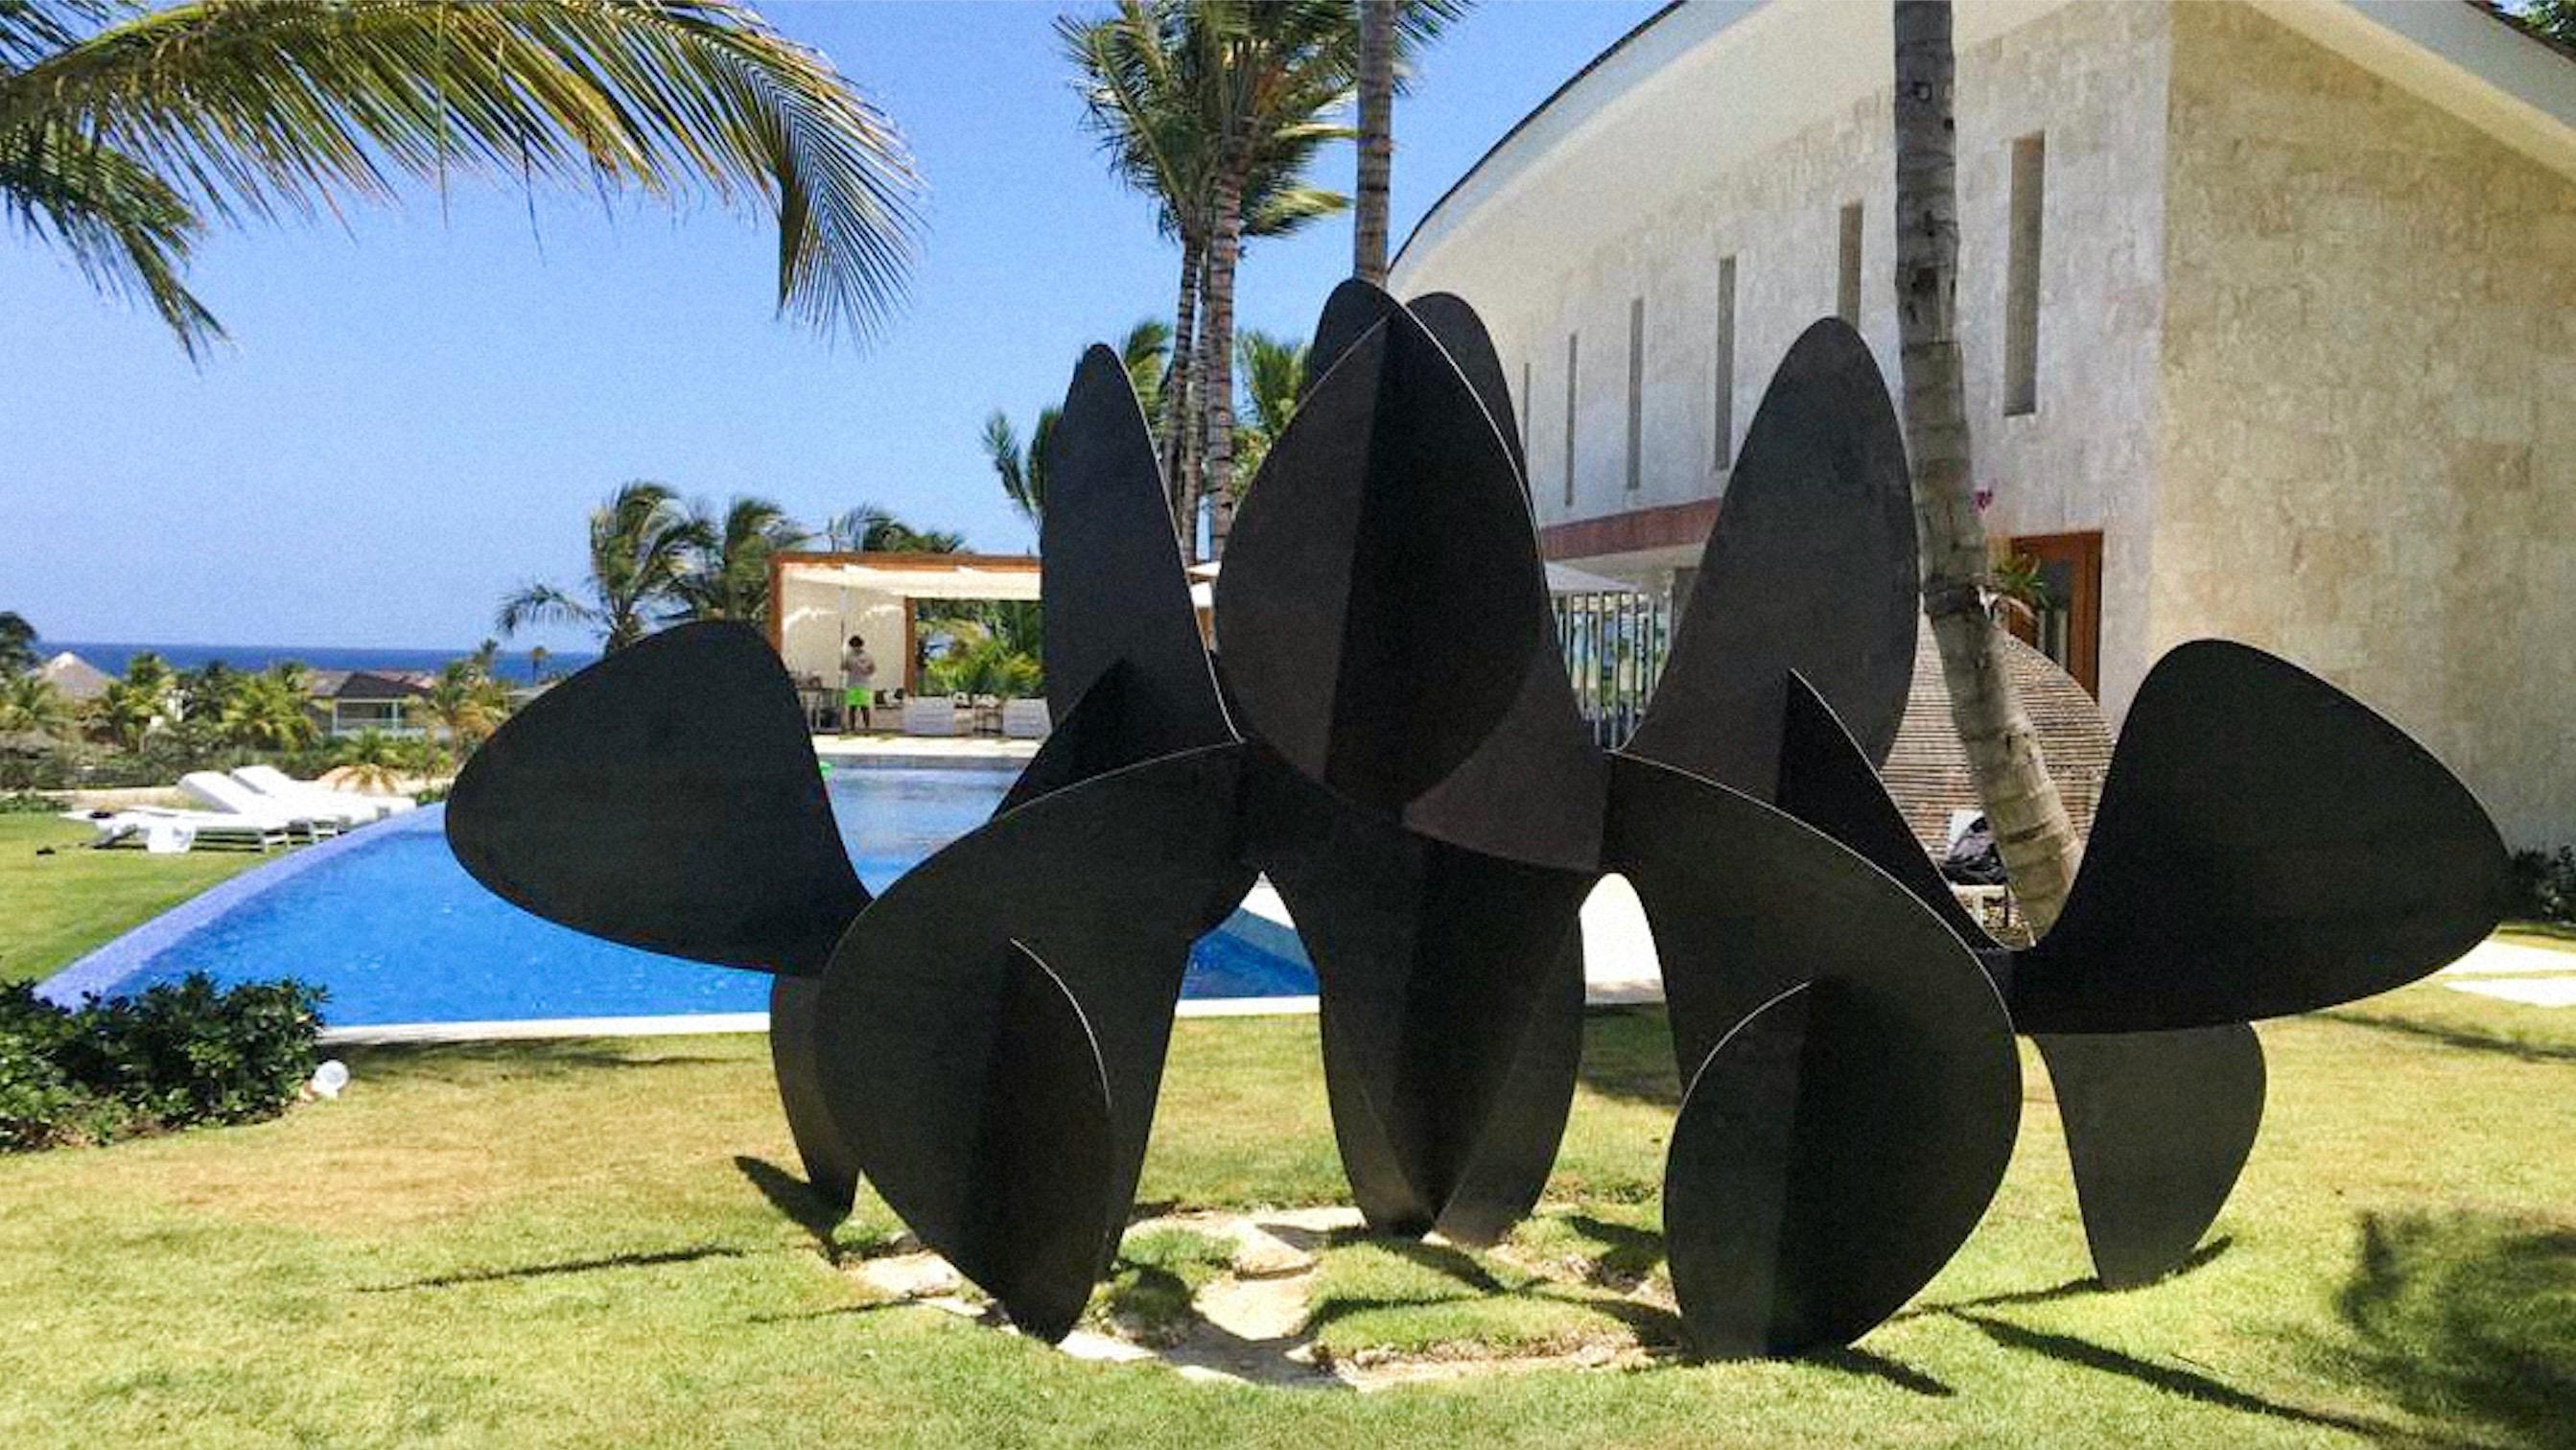 Barricada #2 ac L, sculpture by contemporary Venezuelan artist Alejandro Vega Beuvrin. 
Stainless steel (painted or not) or weathering steel, 235 cm × 400 cm × 155 cm. Edition of 5 + 3 A.P.
The pictures show two different versions of Barricada #2 ac